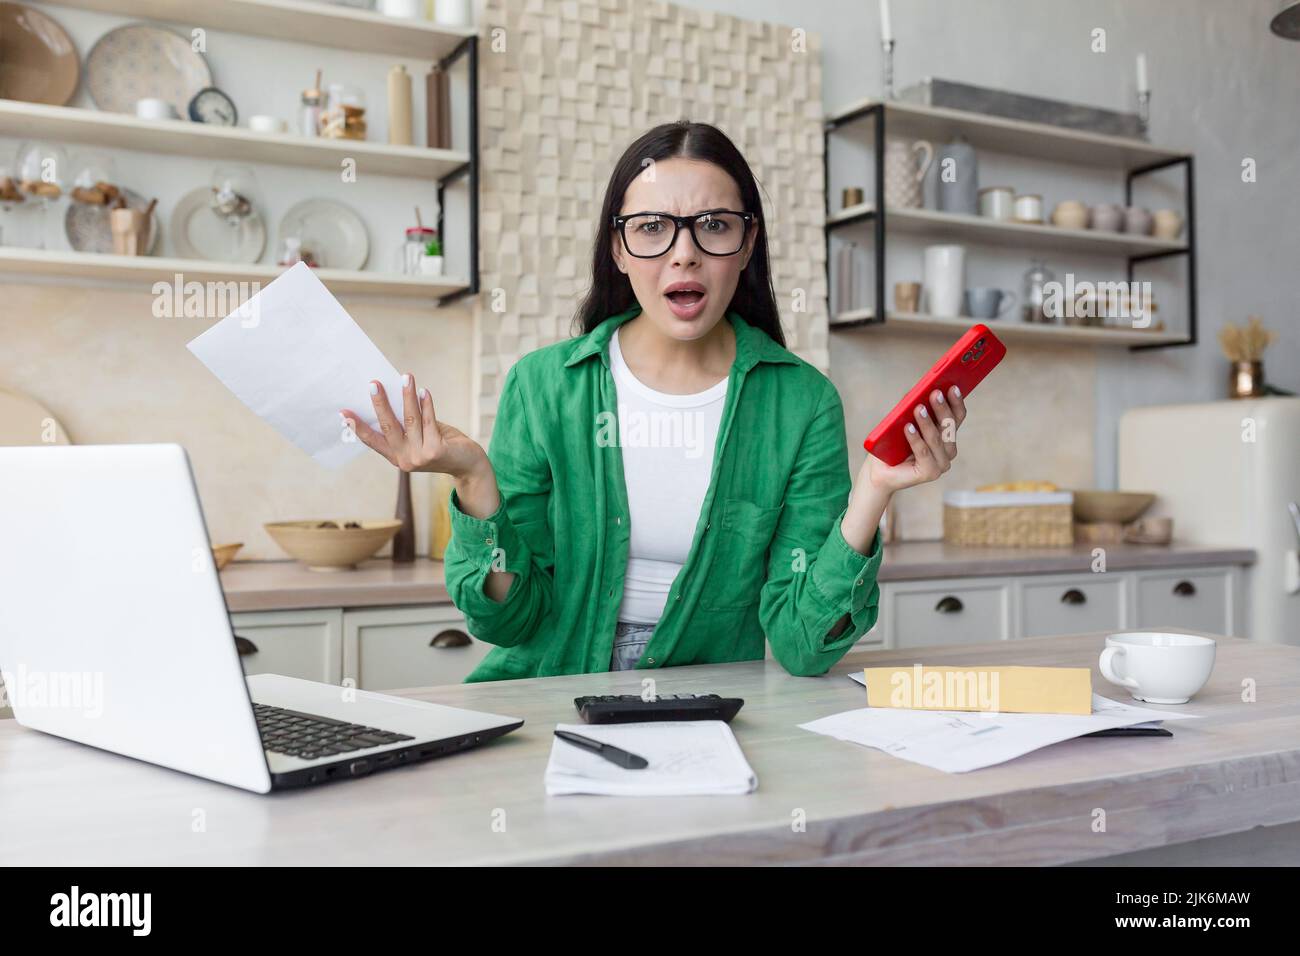 Young beautiful woman in glasses wearing green shirt looking at camera disappointed and angry at homework paper work, holding red phone, brunette calculating household finances in kitchen Stock Photo